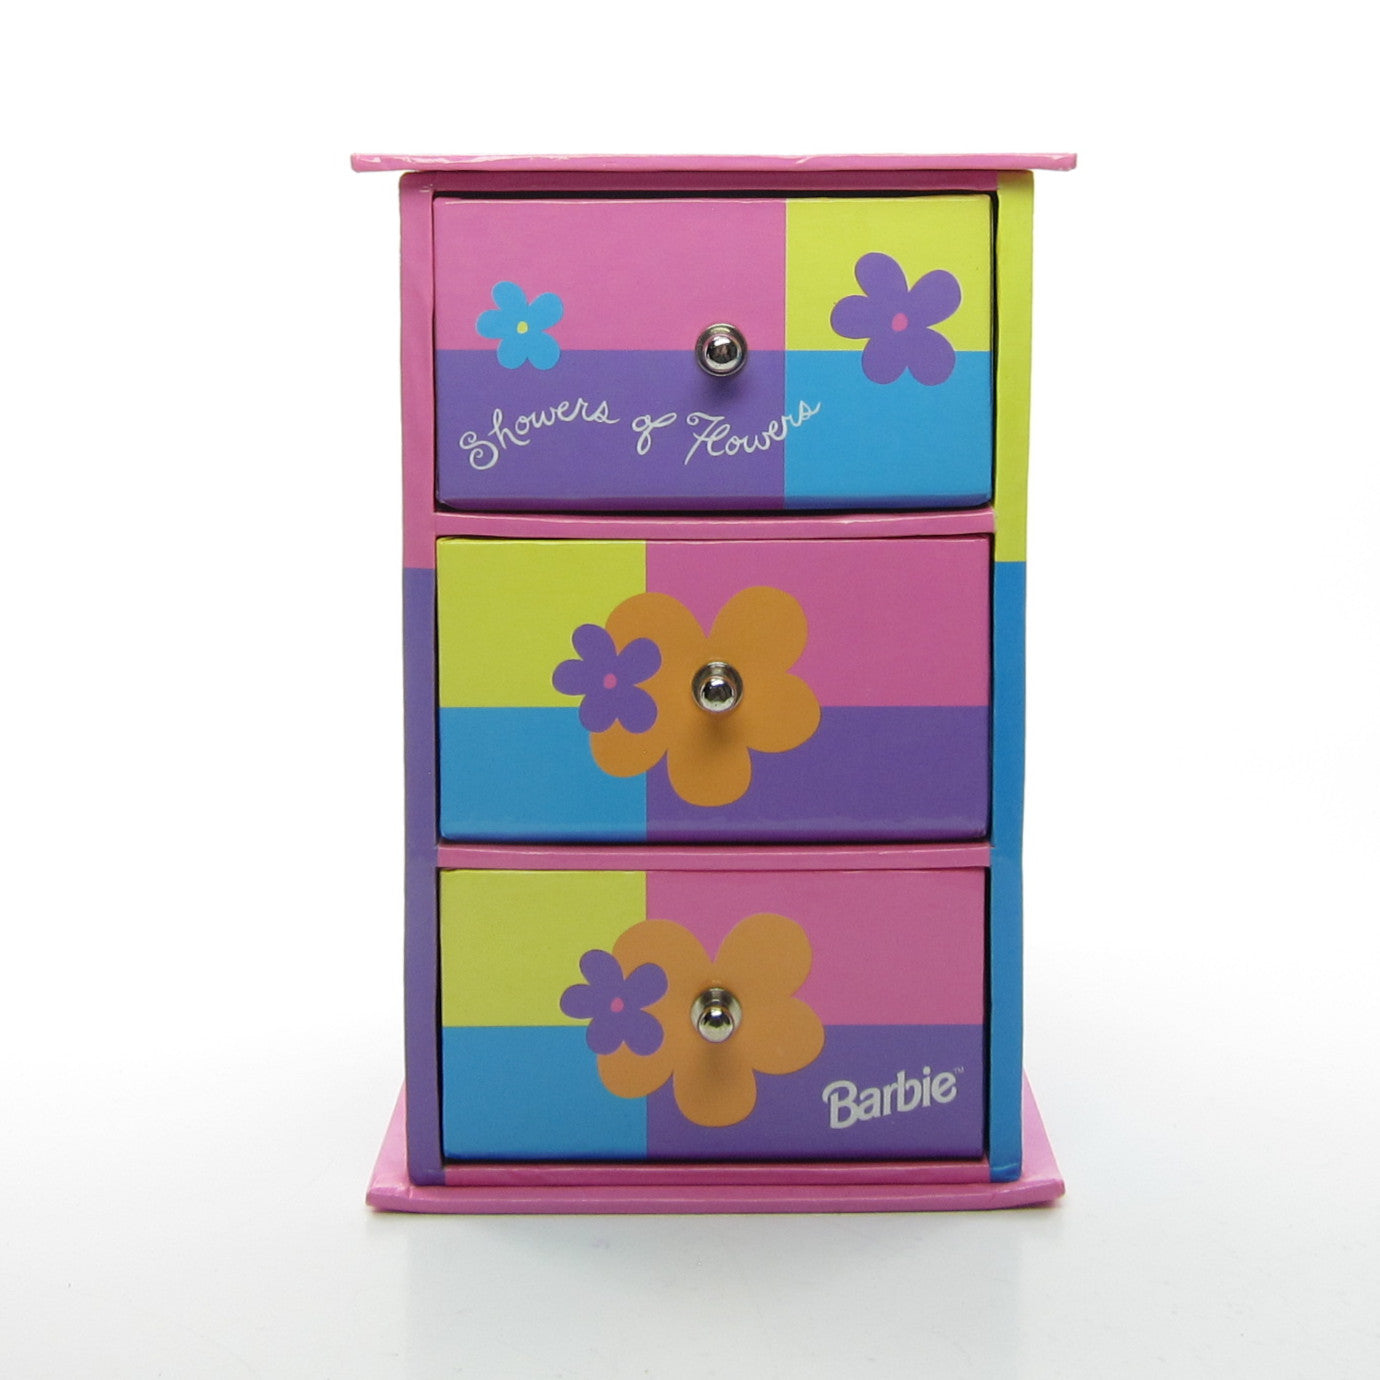 Barbie showers of flowers chest of drawers or jewelry box